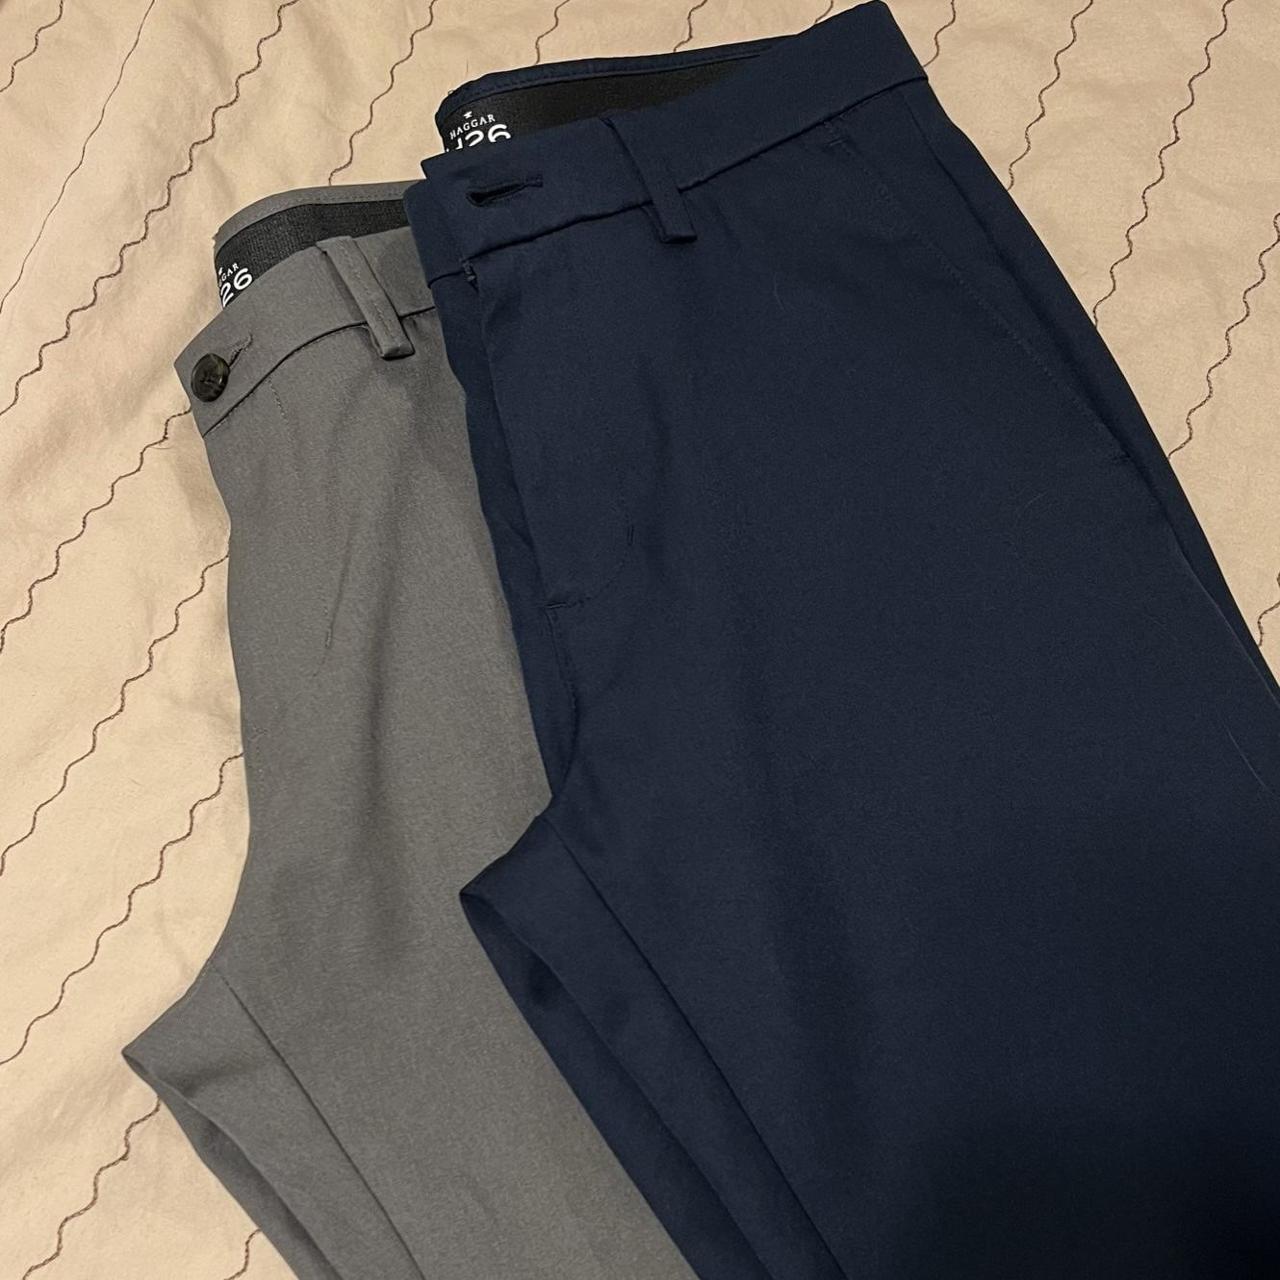 Haggar Men's Grey and Navy Trousers